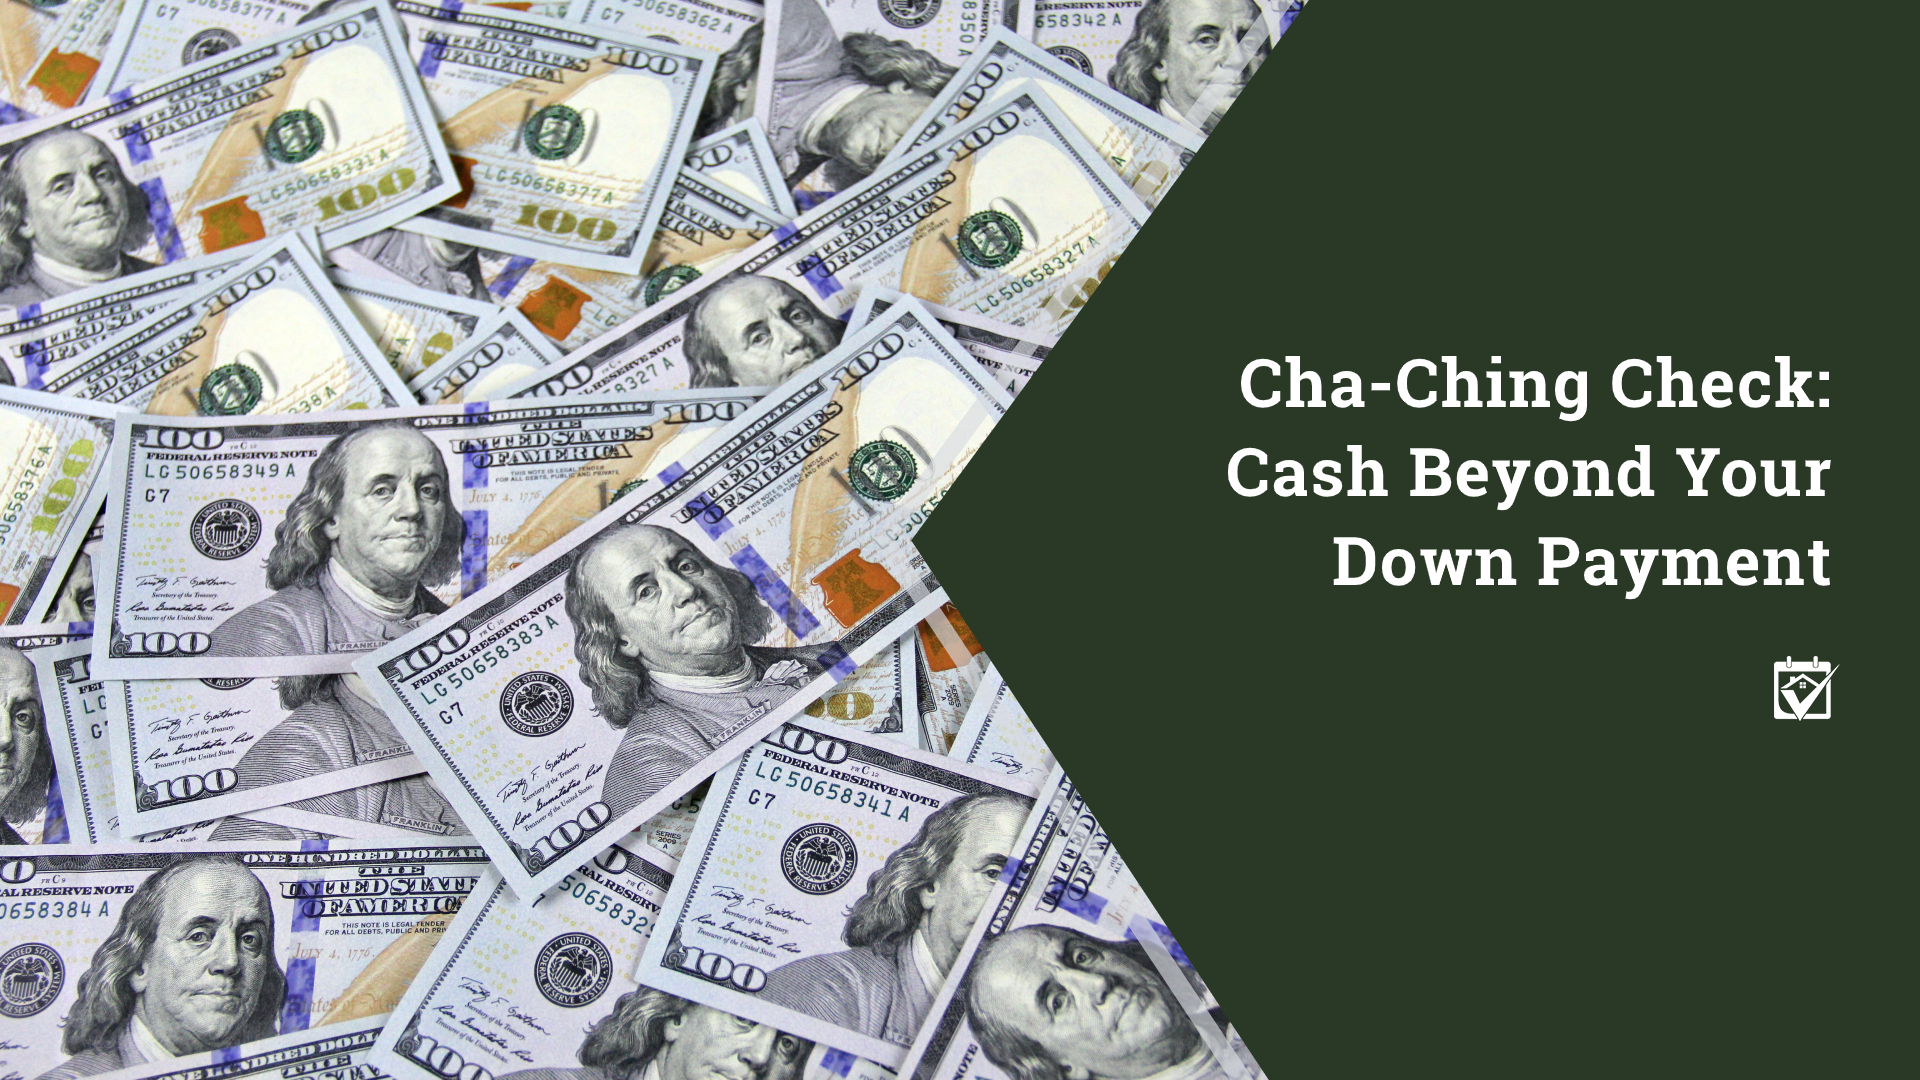 HomeKeepr ChaChing Check Cash Beyond Your Down Payment